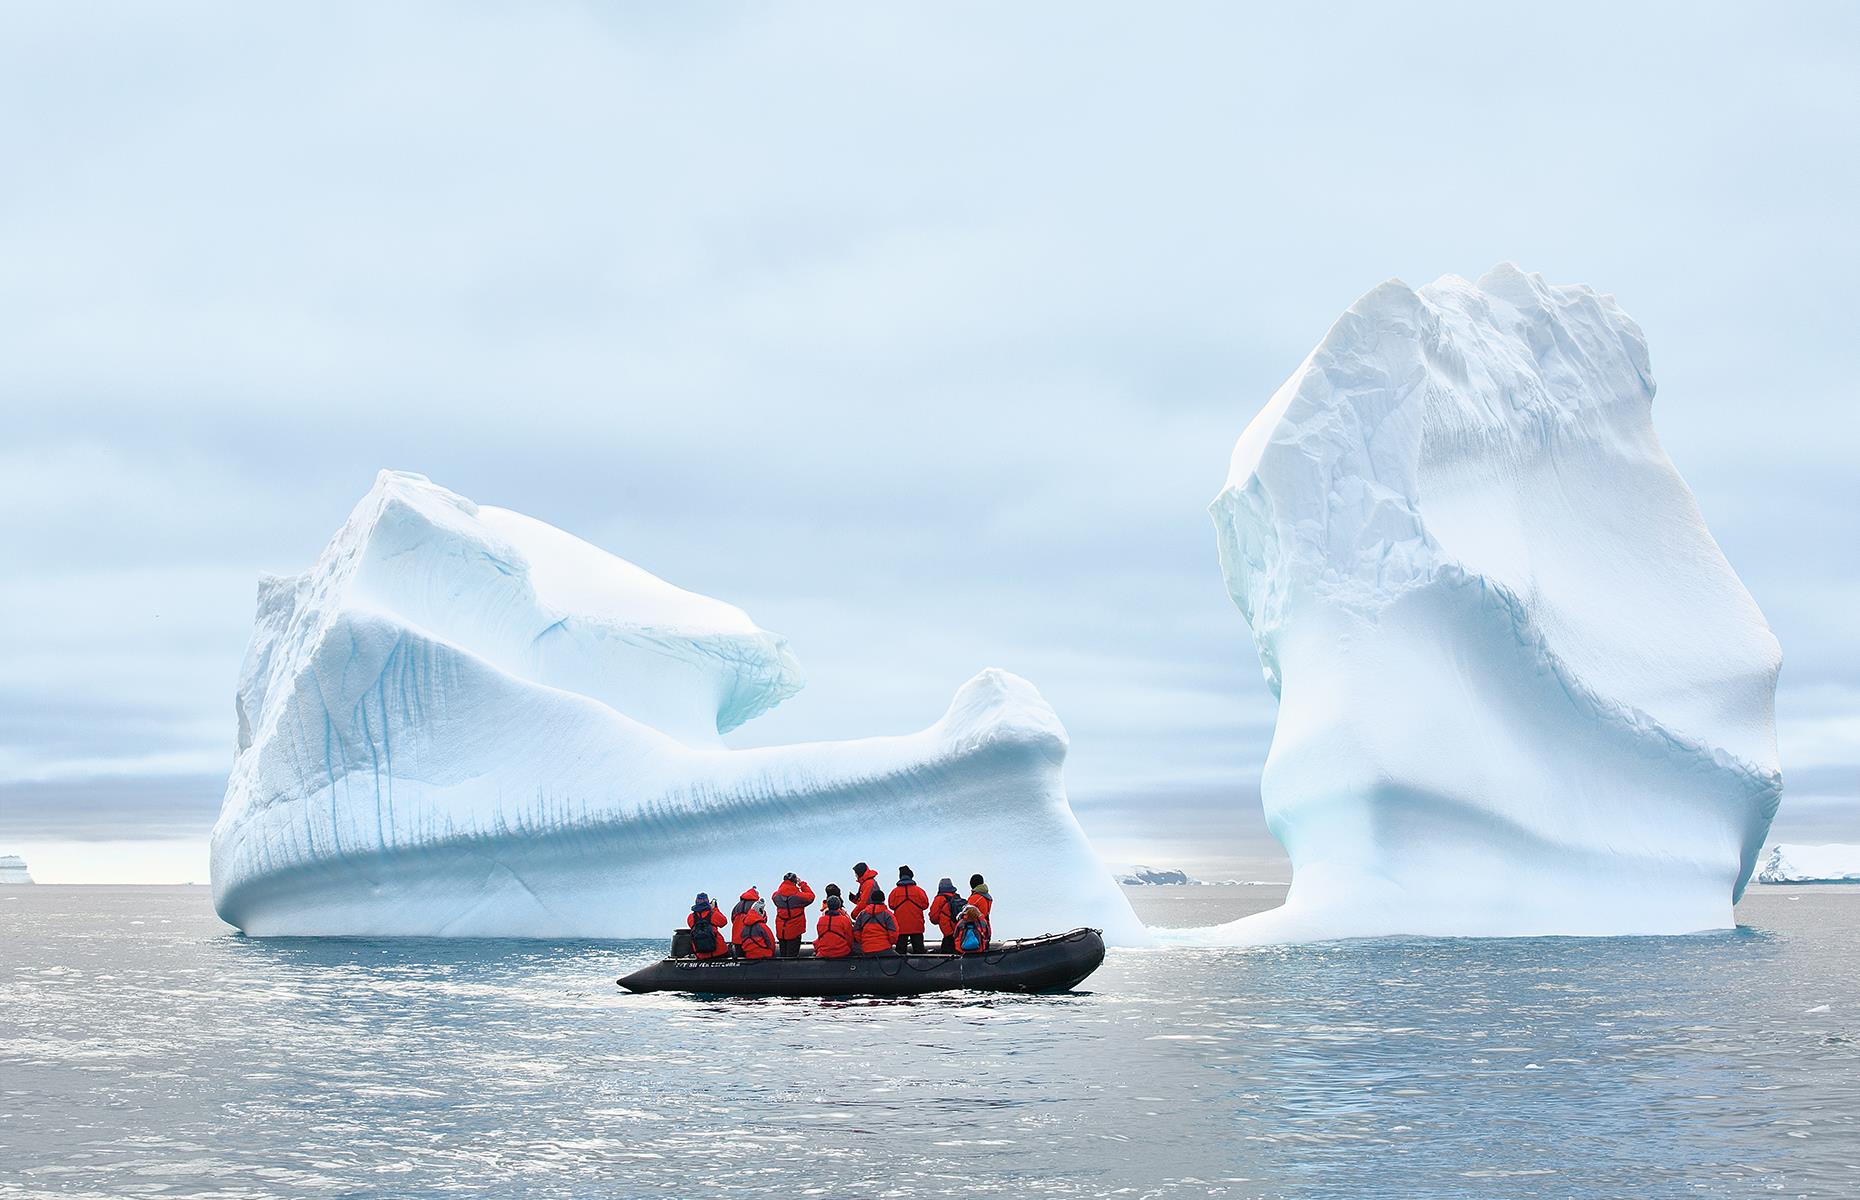 <p>Zodiacs – small, fast boats carried on ships – make it easy to explore different landscapes, whether it’s the frozen tundra or the Galapagos’ wildlife-dotted islands. Special mentions go to <a href="https://www.quarkexpeditions.com/gb/expedition-ships">Quark</a>, which uses environmentally friendly four-stroke engine zodiacs; <a href="https://www.sovereigncruise.co.uk/cruise-offers/cruise-lines/silversea-cruises-cruise-offers?infinity=gaw&gclid=CjwKCAiAzp6eBhByEiwA_gGq5KT8I_ANPmBAhrD8Rxb55wGxK9PqW3zMqsZG92sq3-VMSFggCgIMaBoCaJoQAvD_BwE">Silversea</a>, famous for its expert-led zodiac excursions, and <a href="https://www.aexpeditions.co.uk">AE Expeditions</a> – the line’s new expedition ship Sylvia Earle has 15 zodiacs. A seven-day Spitsbergen sailing with Quark costs from $5,547. </p>